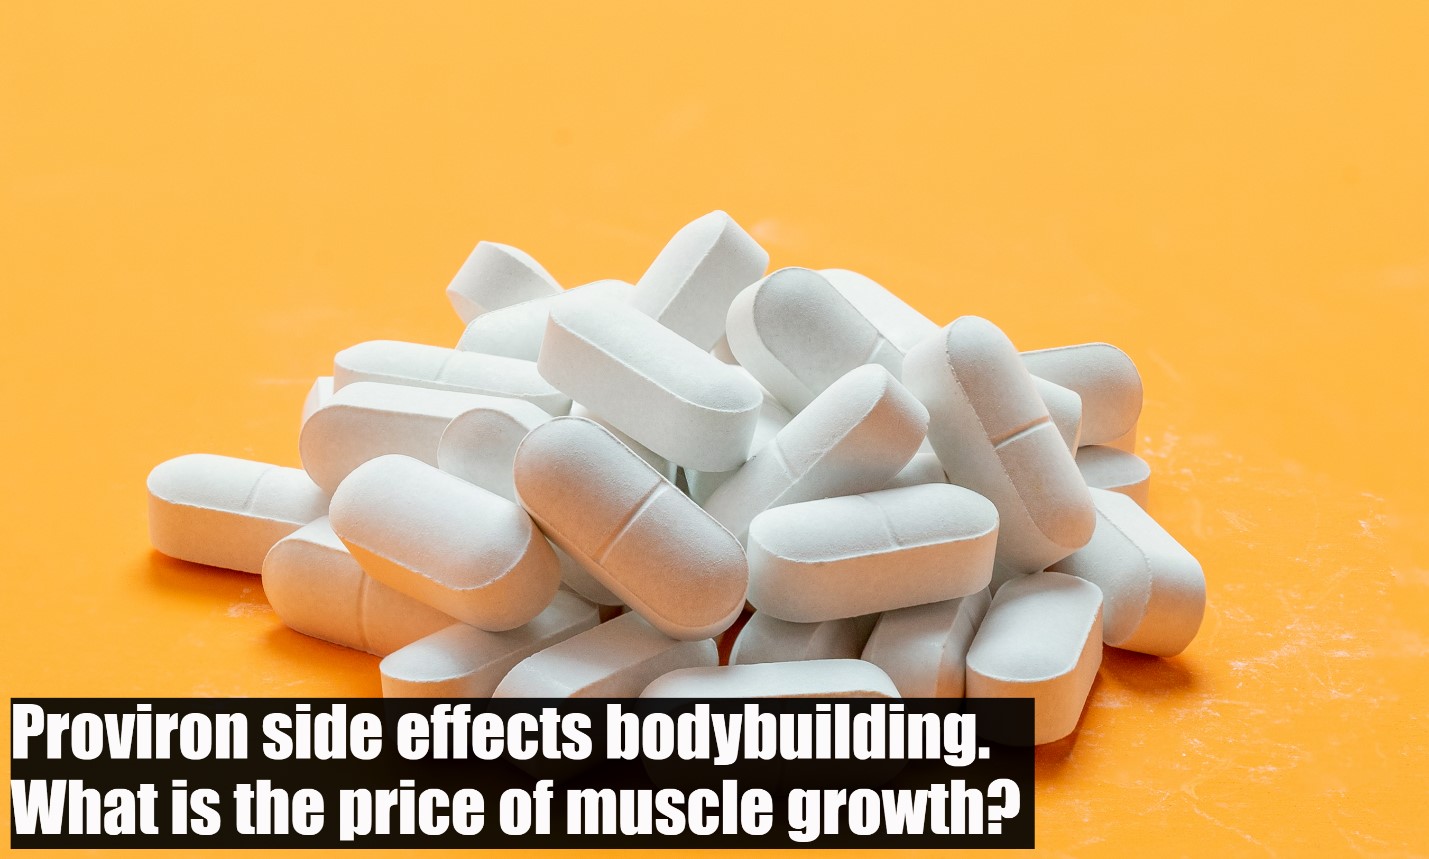 Proviron side effects bodybuilding. What is the price of muscle growth?